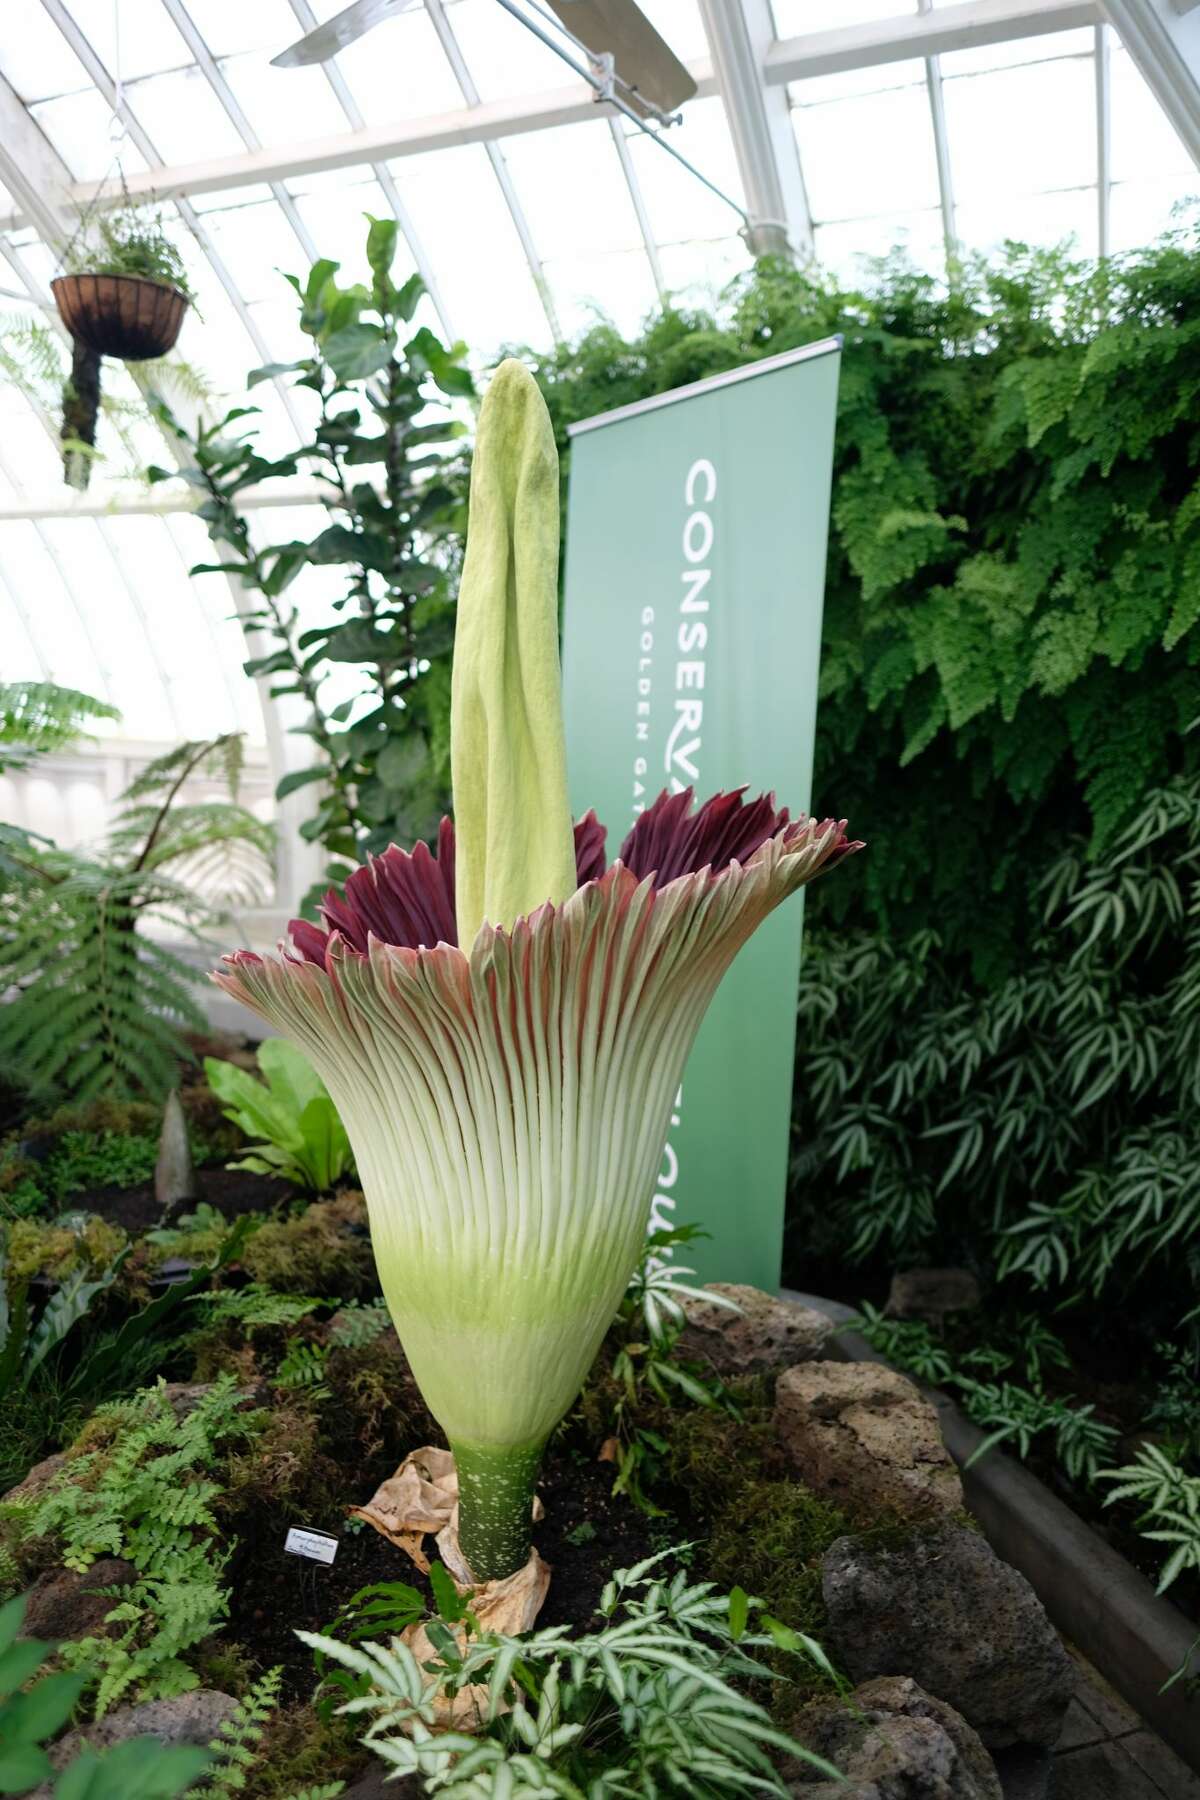 Smelly corpse flower in bloom at the Conservatory of Flowers in San